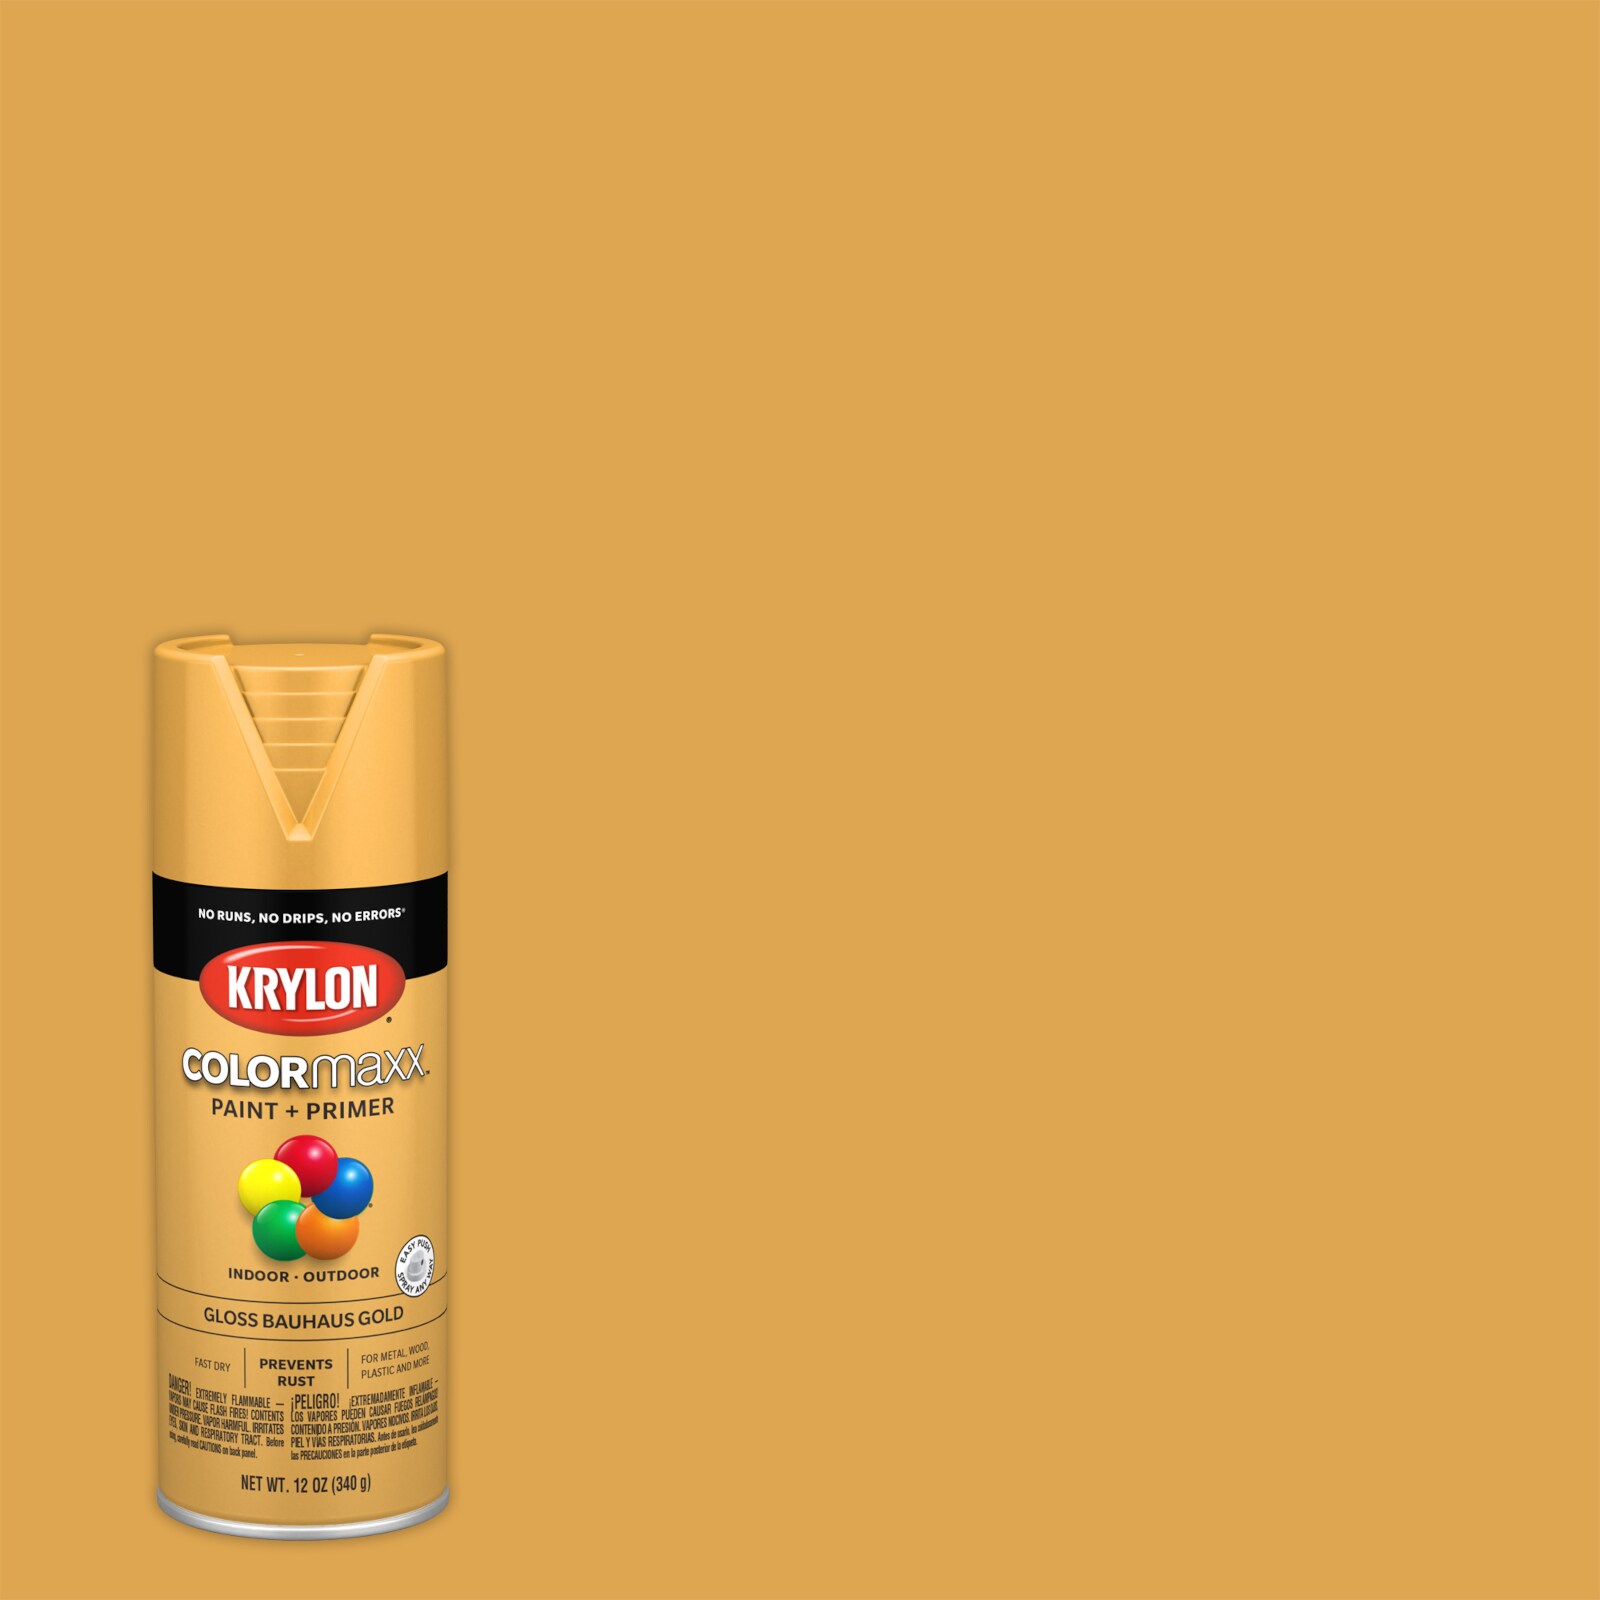 Krylon COLORmaxx Gloss Bauhaus Gold Spray Paint and Primer In One